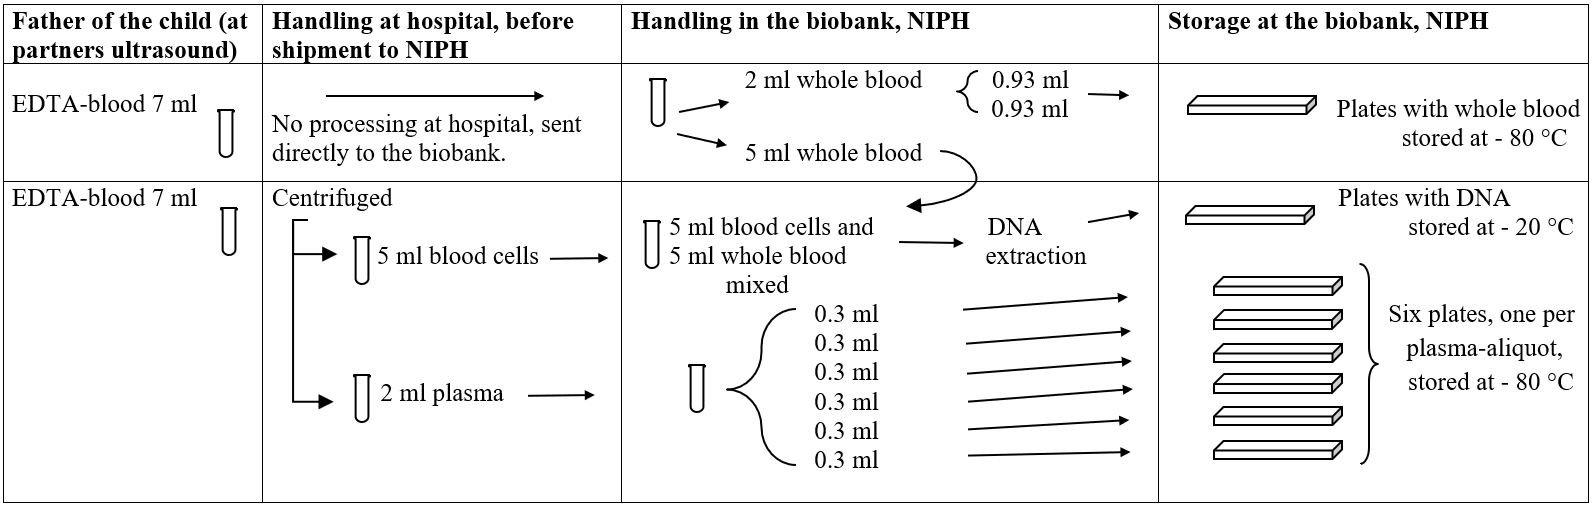 Figure 3. Flow chart of the process from MoBa sample collection to storage of the different specimen at the biobank. This chart shows the process for samples collected from the fathers taken at partners ultrasound at week 17th - 20th of pregnancy. 